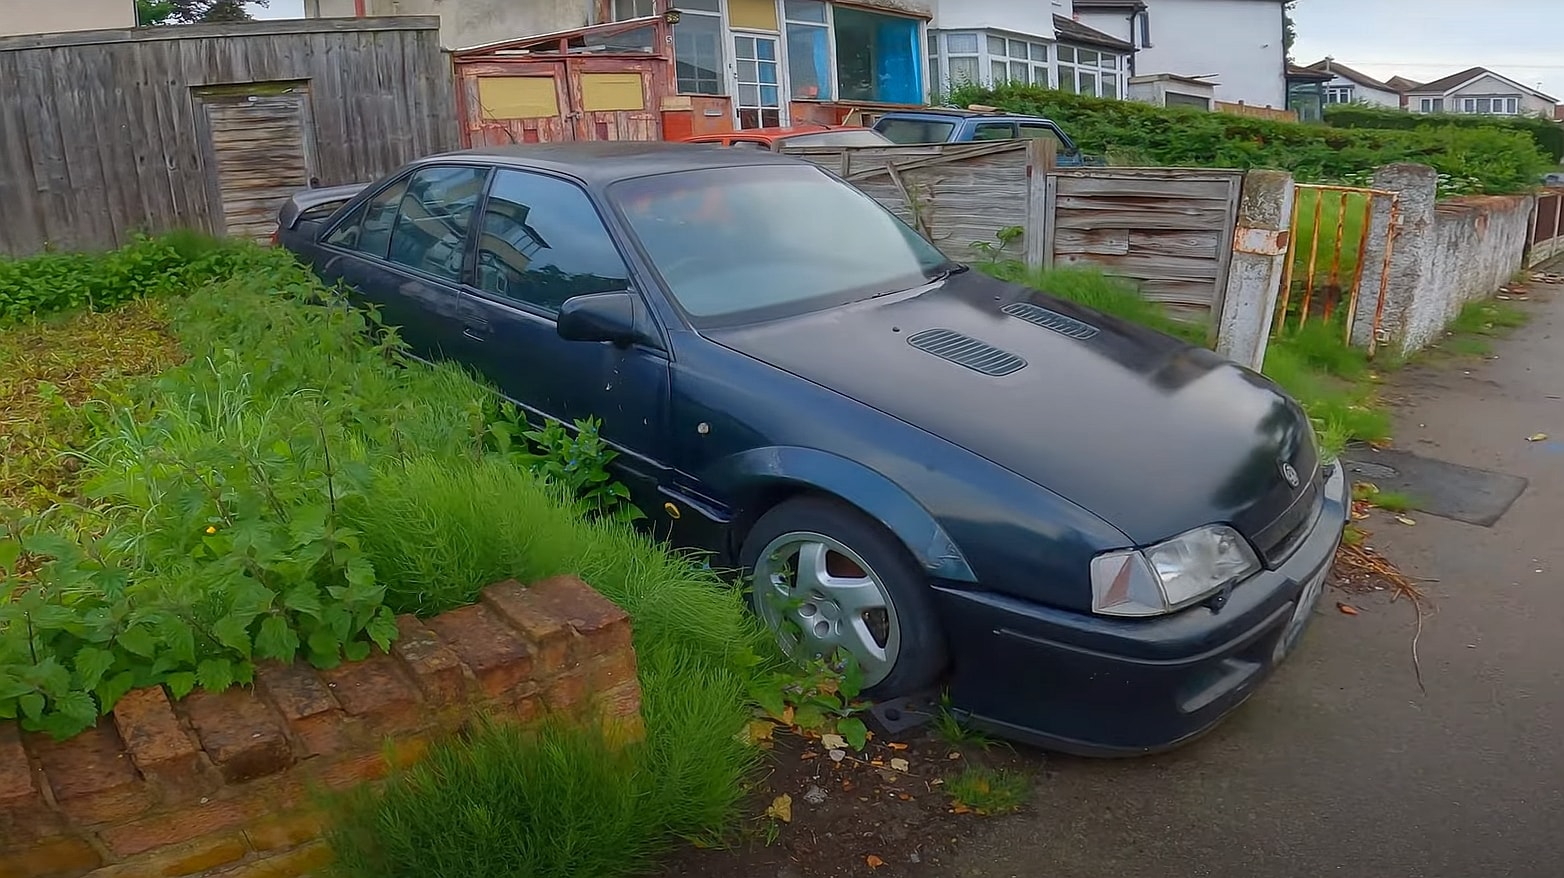 You are currently viewing Lotus Carlton abandoned for 30 years is an unlikely find on a farm